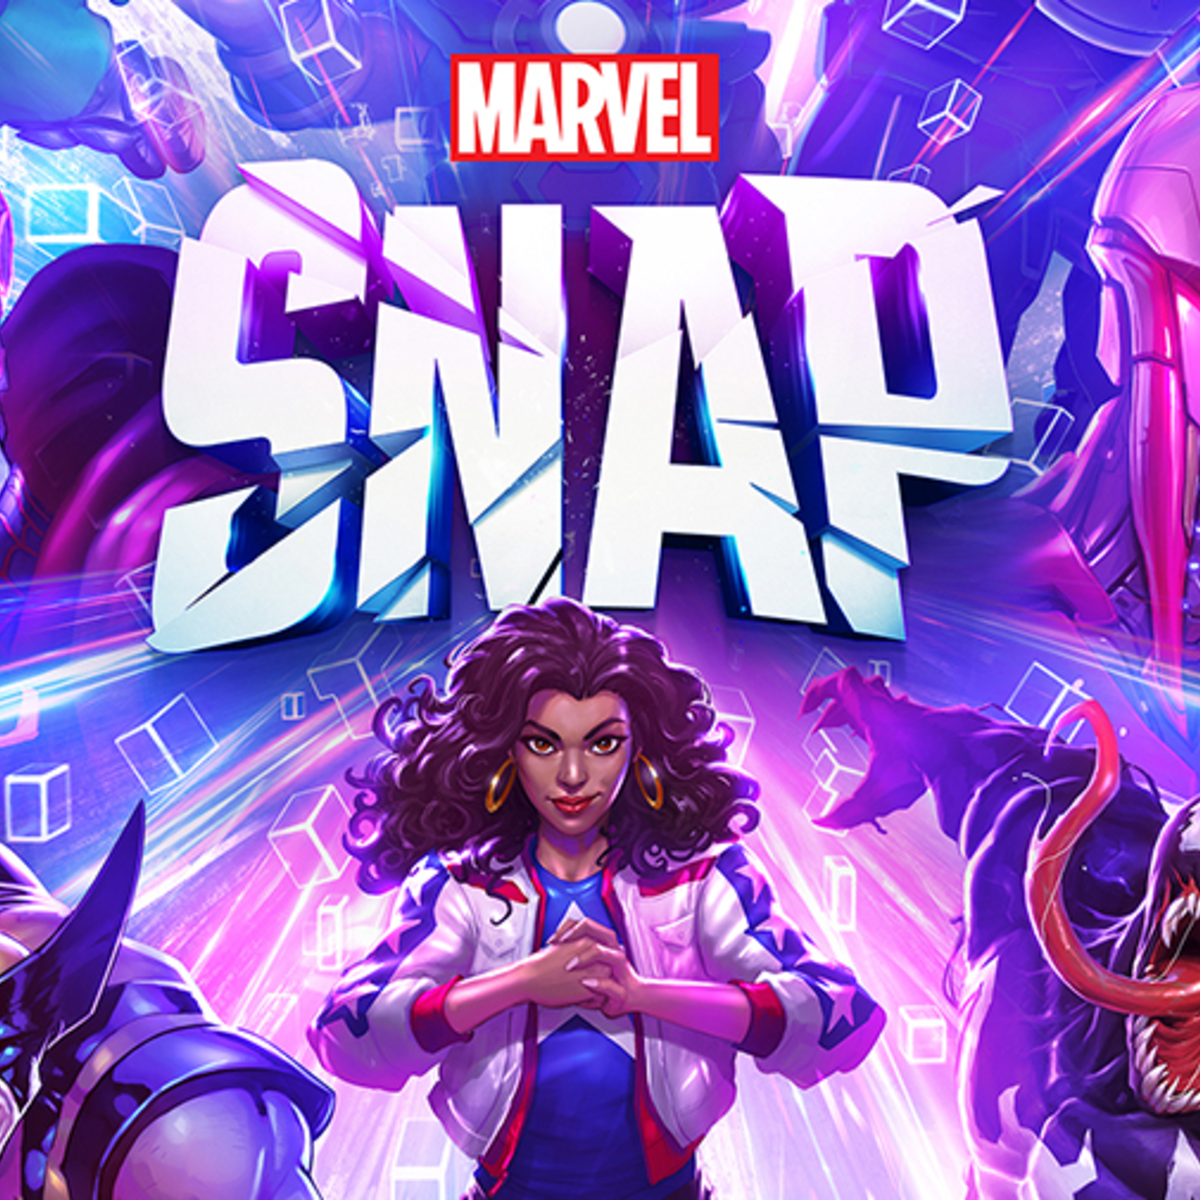 MARVEL SNAP - Apps on Google Play